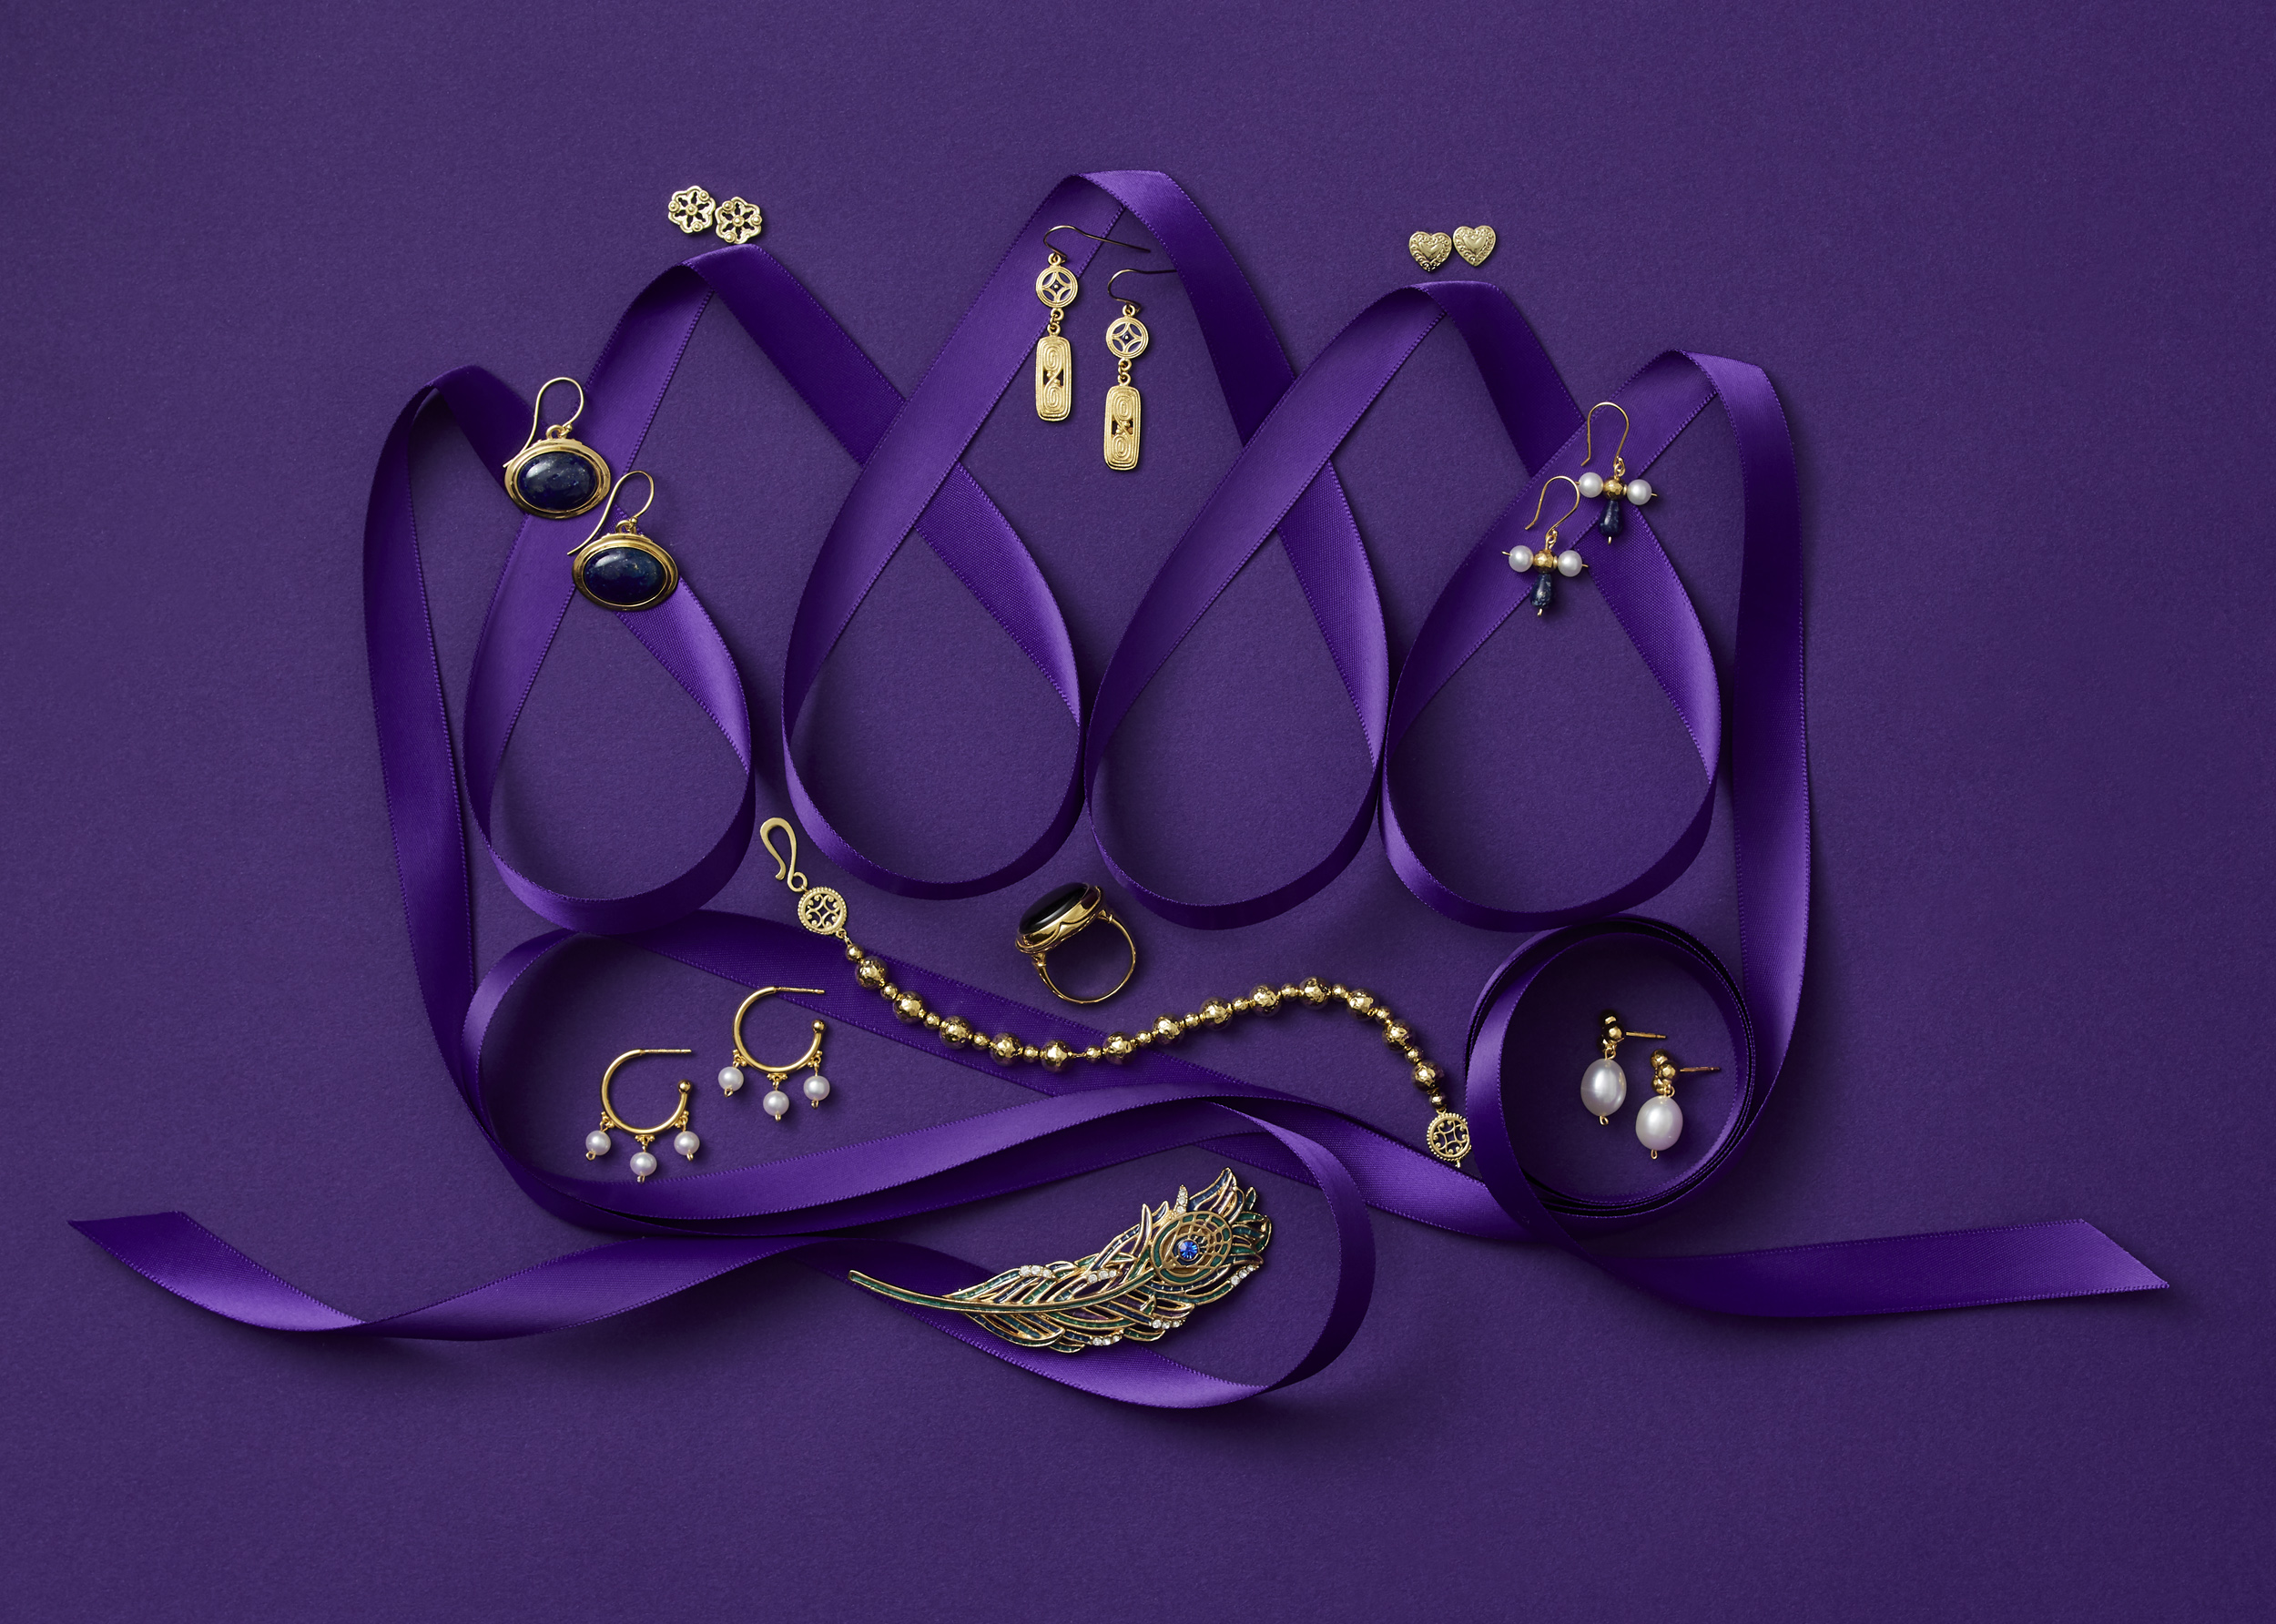 marketing still life photograph of a crown made of purple ribbon adorned with gold and pearl jewelry including earrings, a pin, a ring, and bracelets on a purple background.